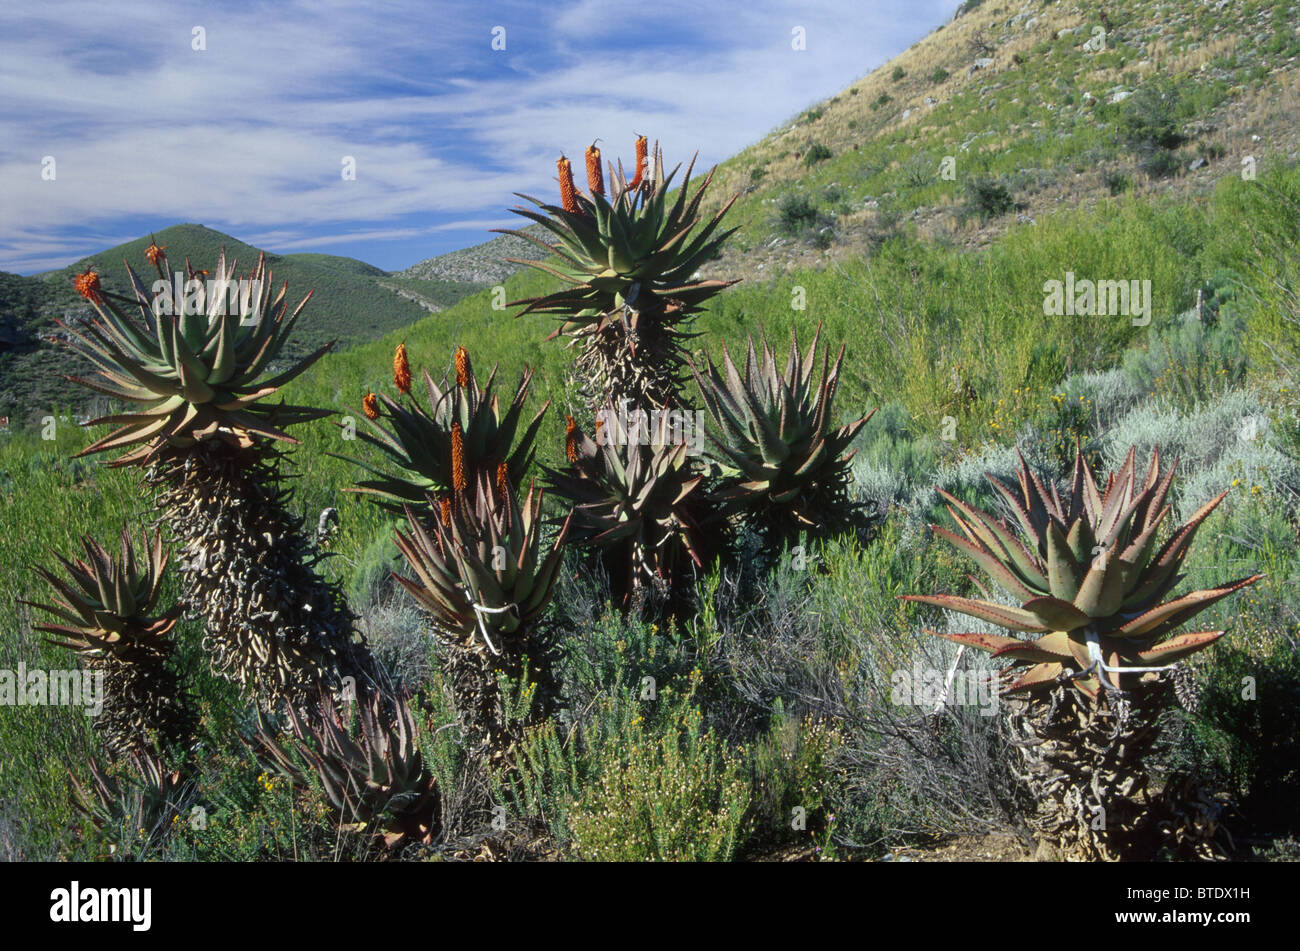 A mountain landscape scene in De Hoek in the Western Cape with aloes and scrub vegetation Stock Photo